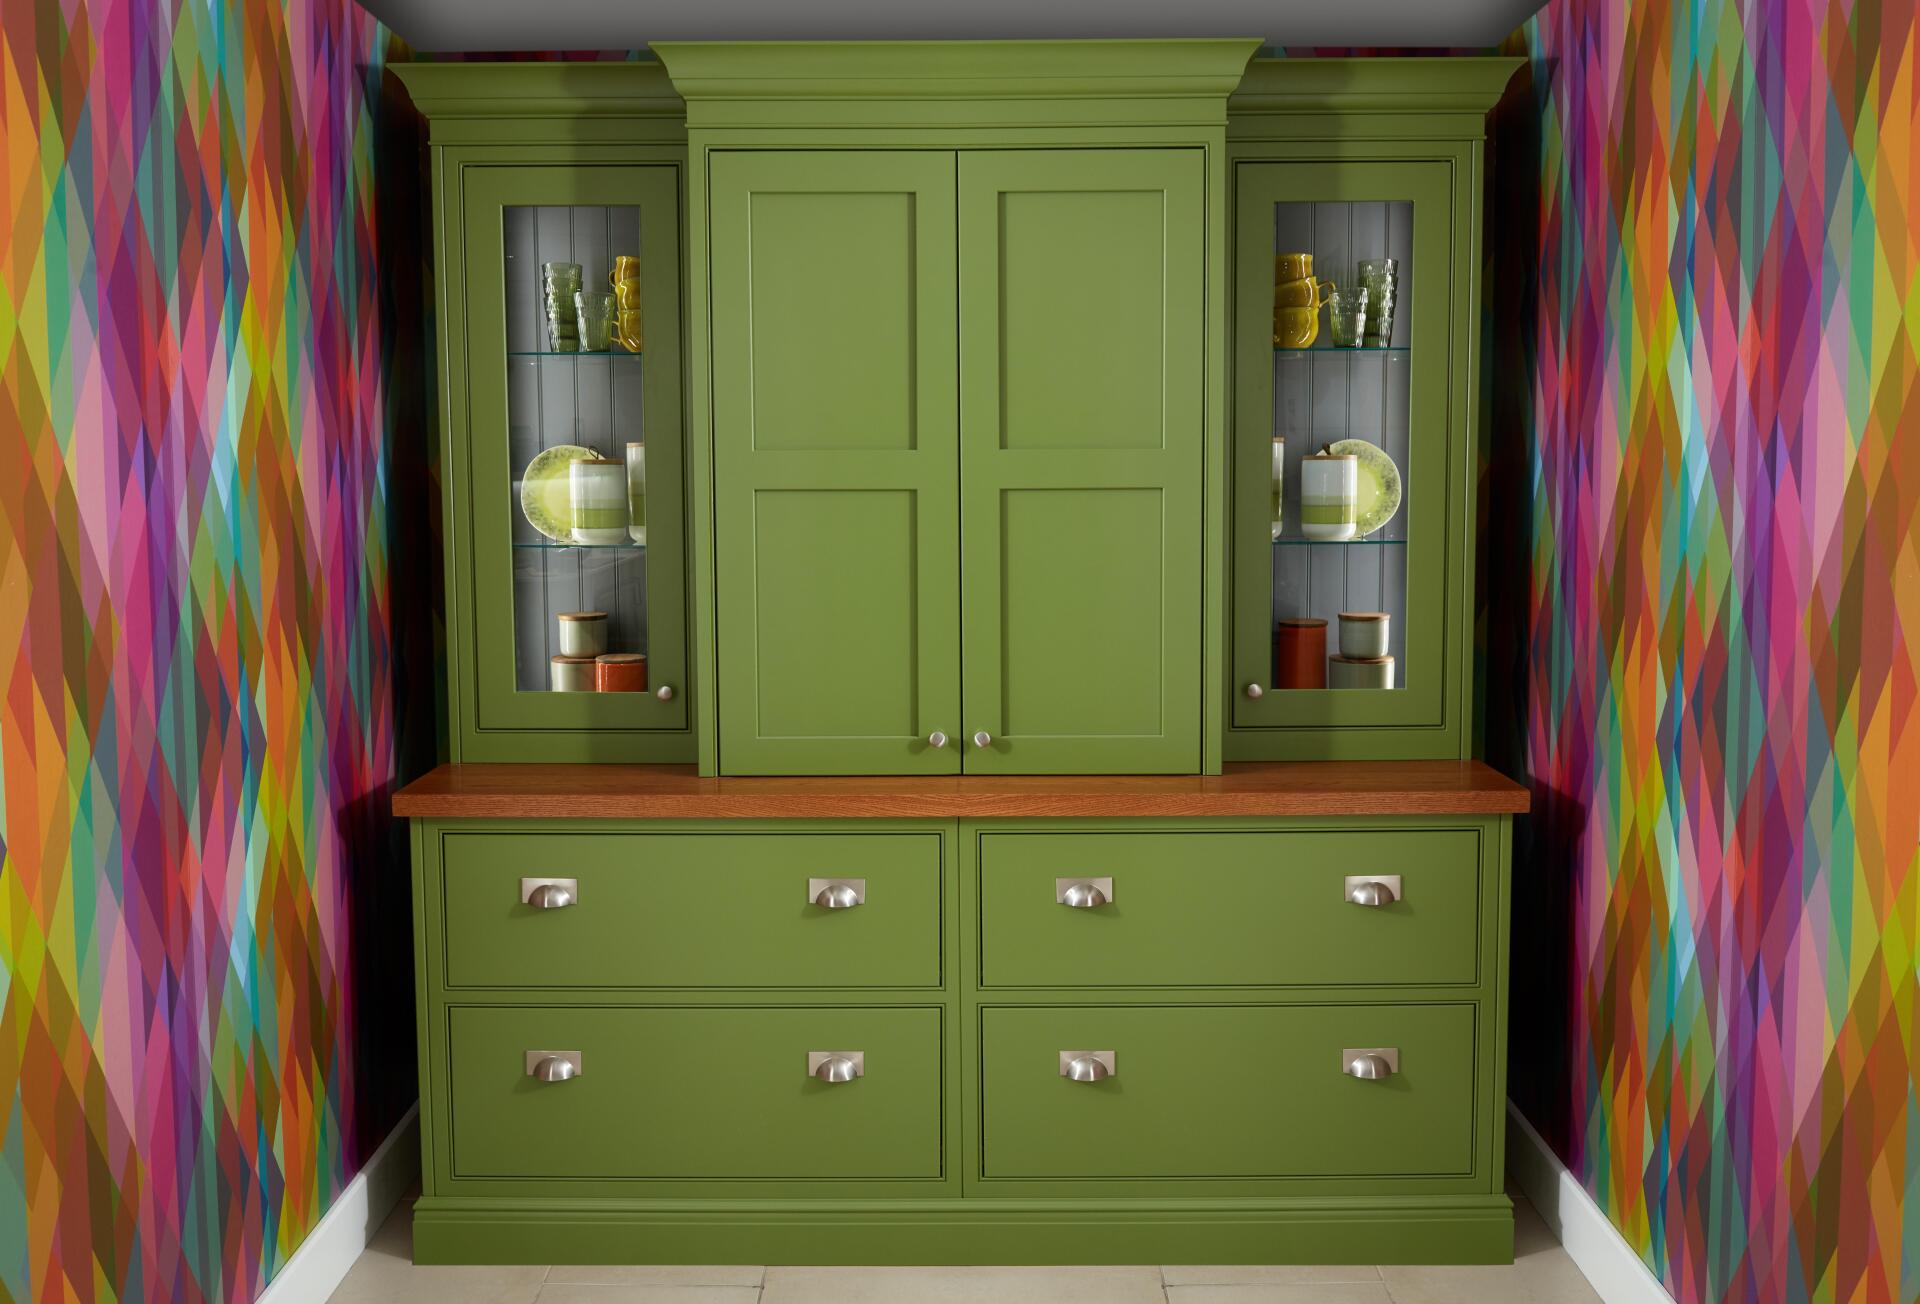 Funky coloured wallpaper and bright green dresser